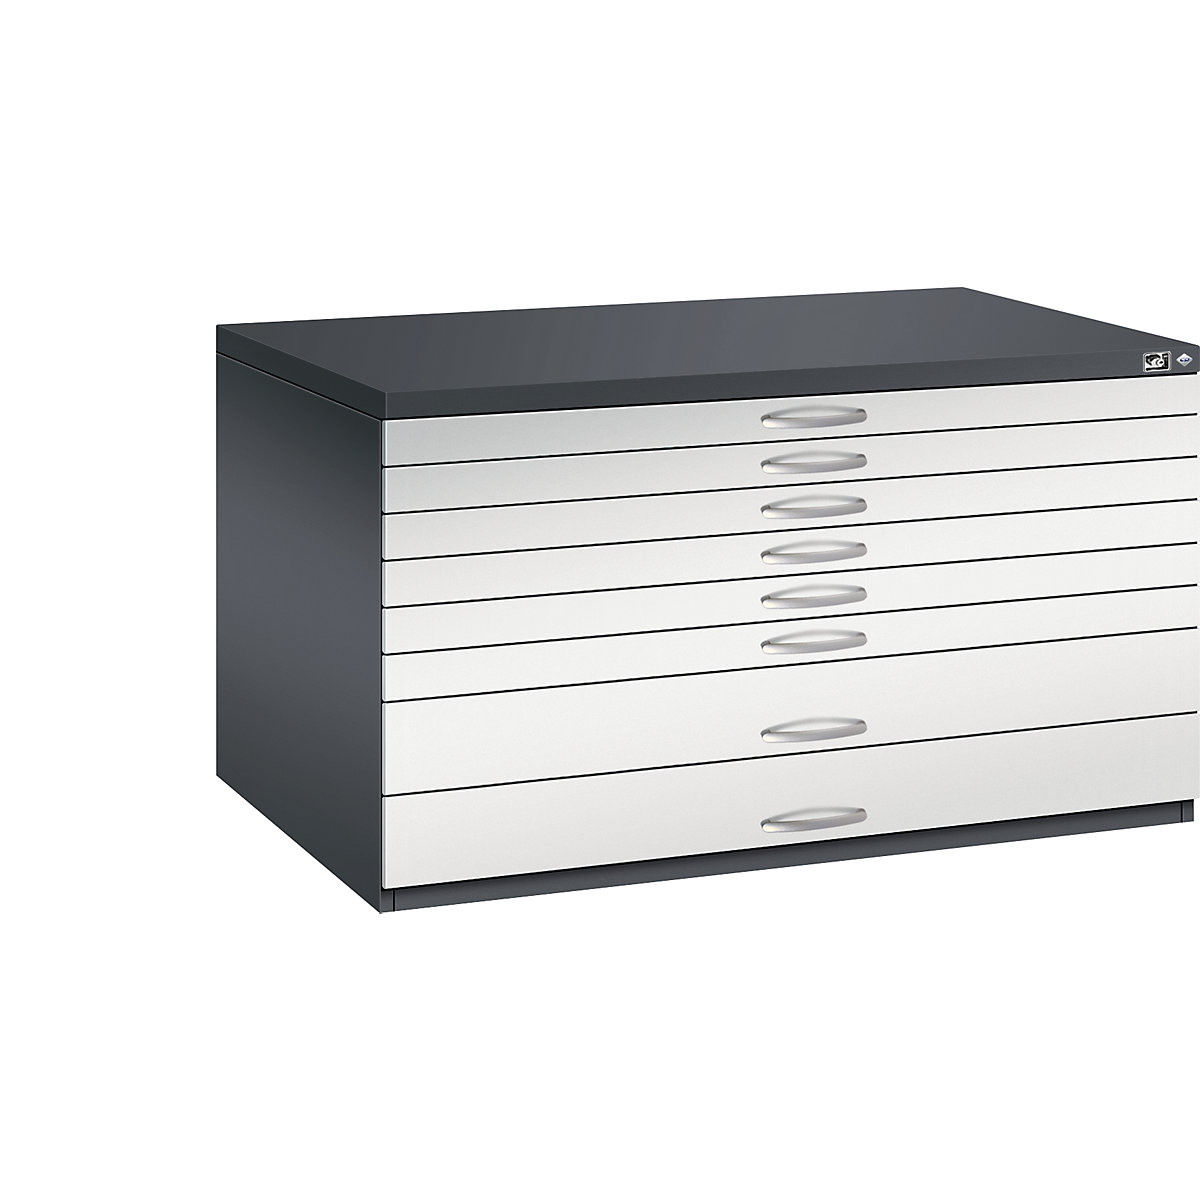 Drawing cabinet – C+P, A0, 8 drawers, height 760 mm, black grey / light grey-22